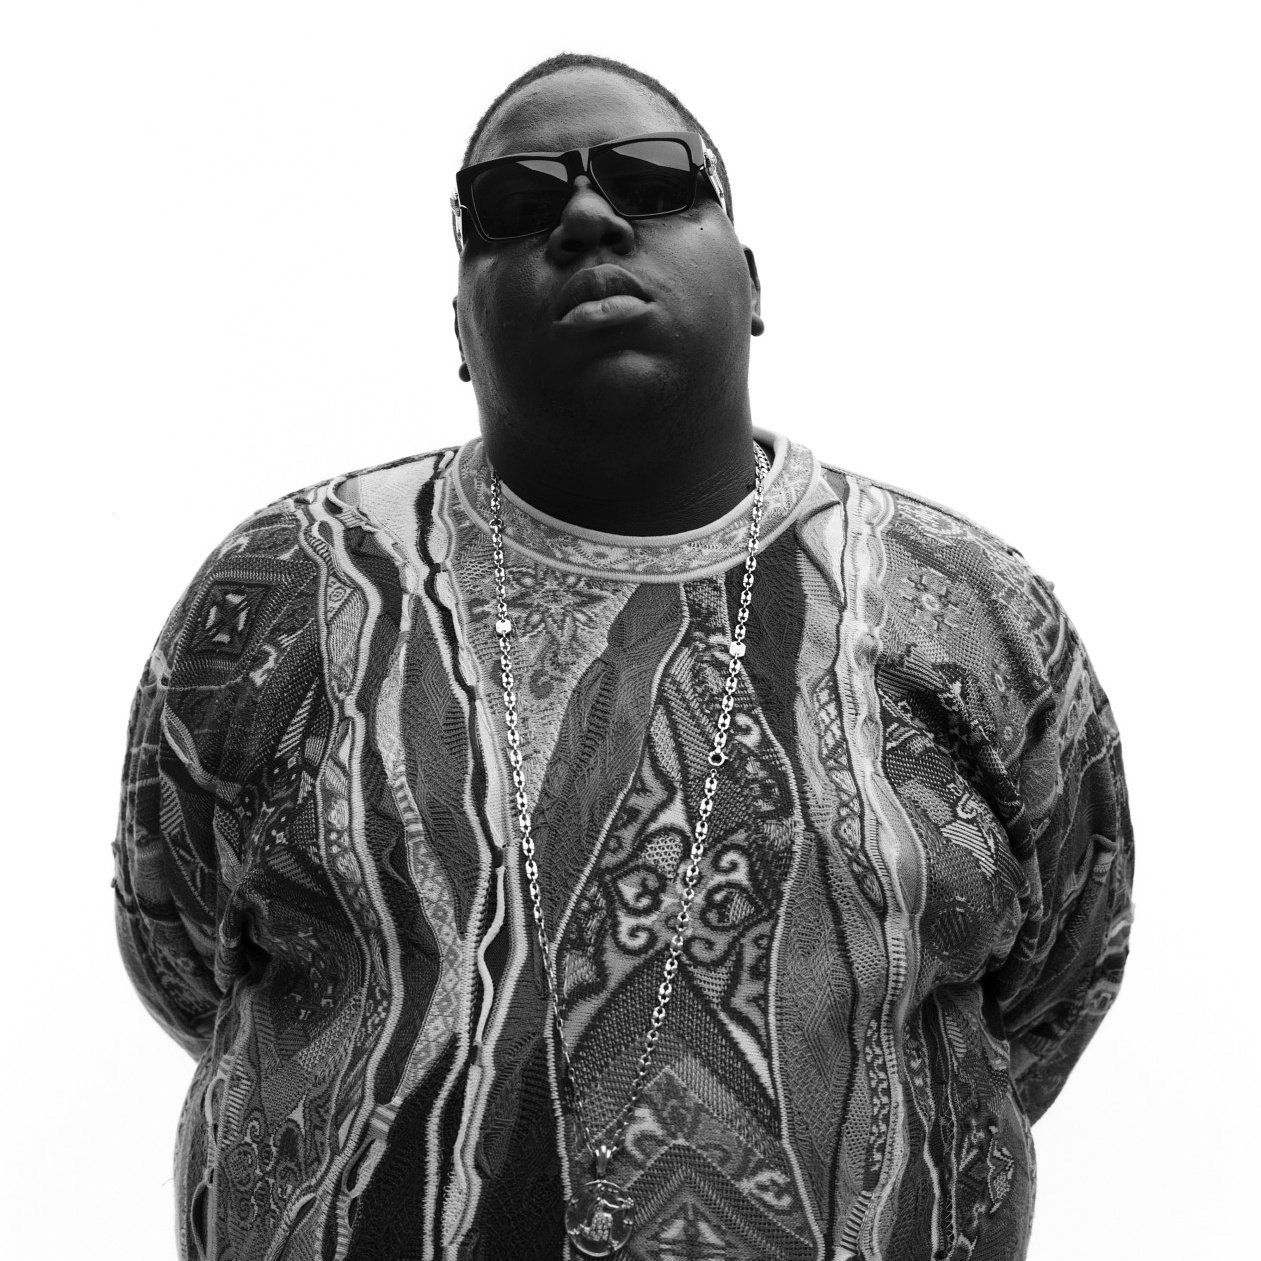 Happy birthday to an absolute legend, The Notorious B.I.G.! Drop a comment with your favorite song 